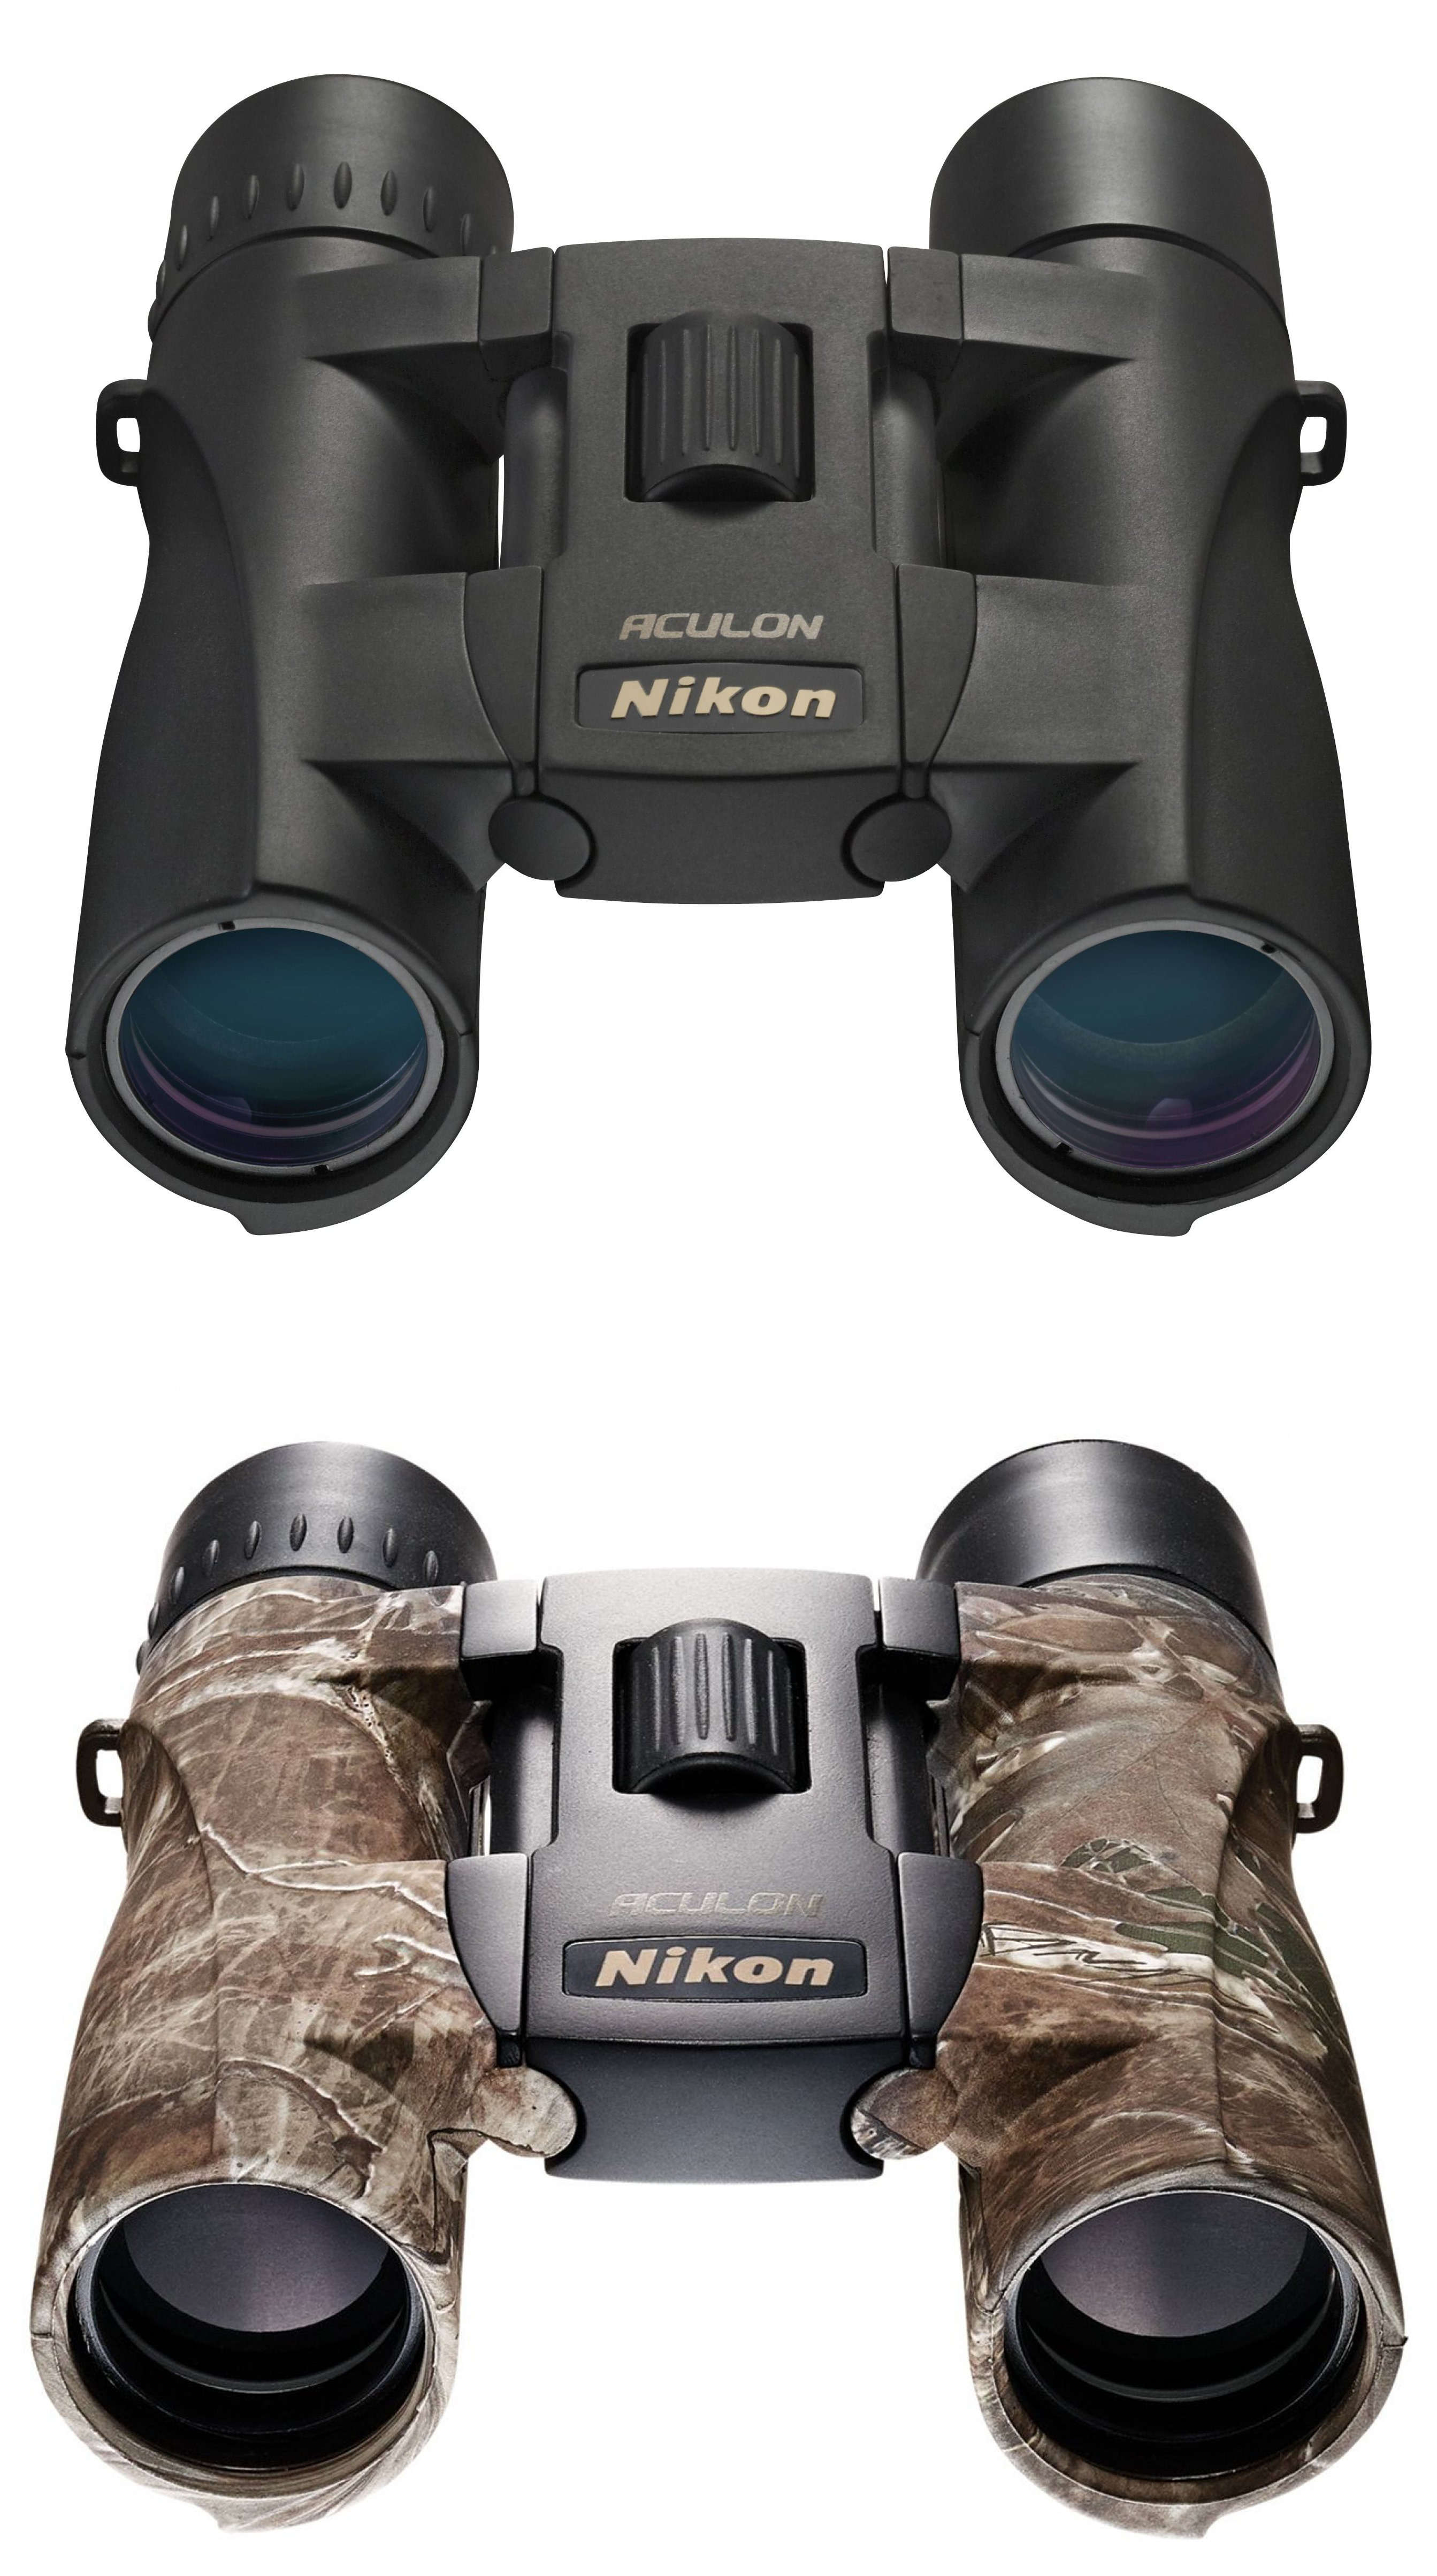 Nikon Aculon Handling Off Up Prism 10x25mm and Shipping Free A30 Star Roof 4.4 Binoculars 26% w/ to | Rating